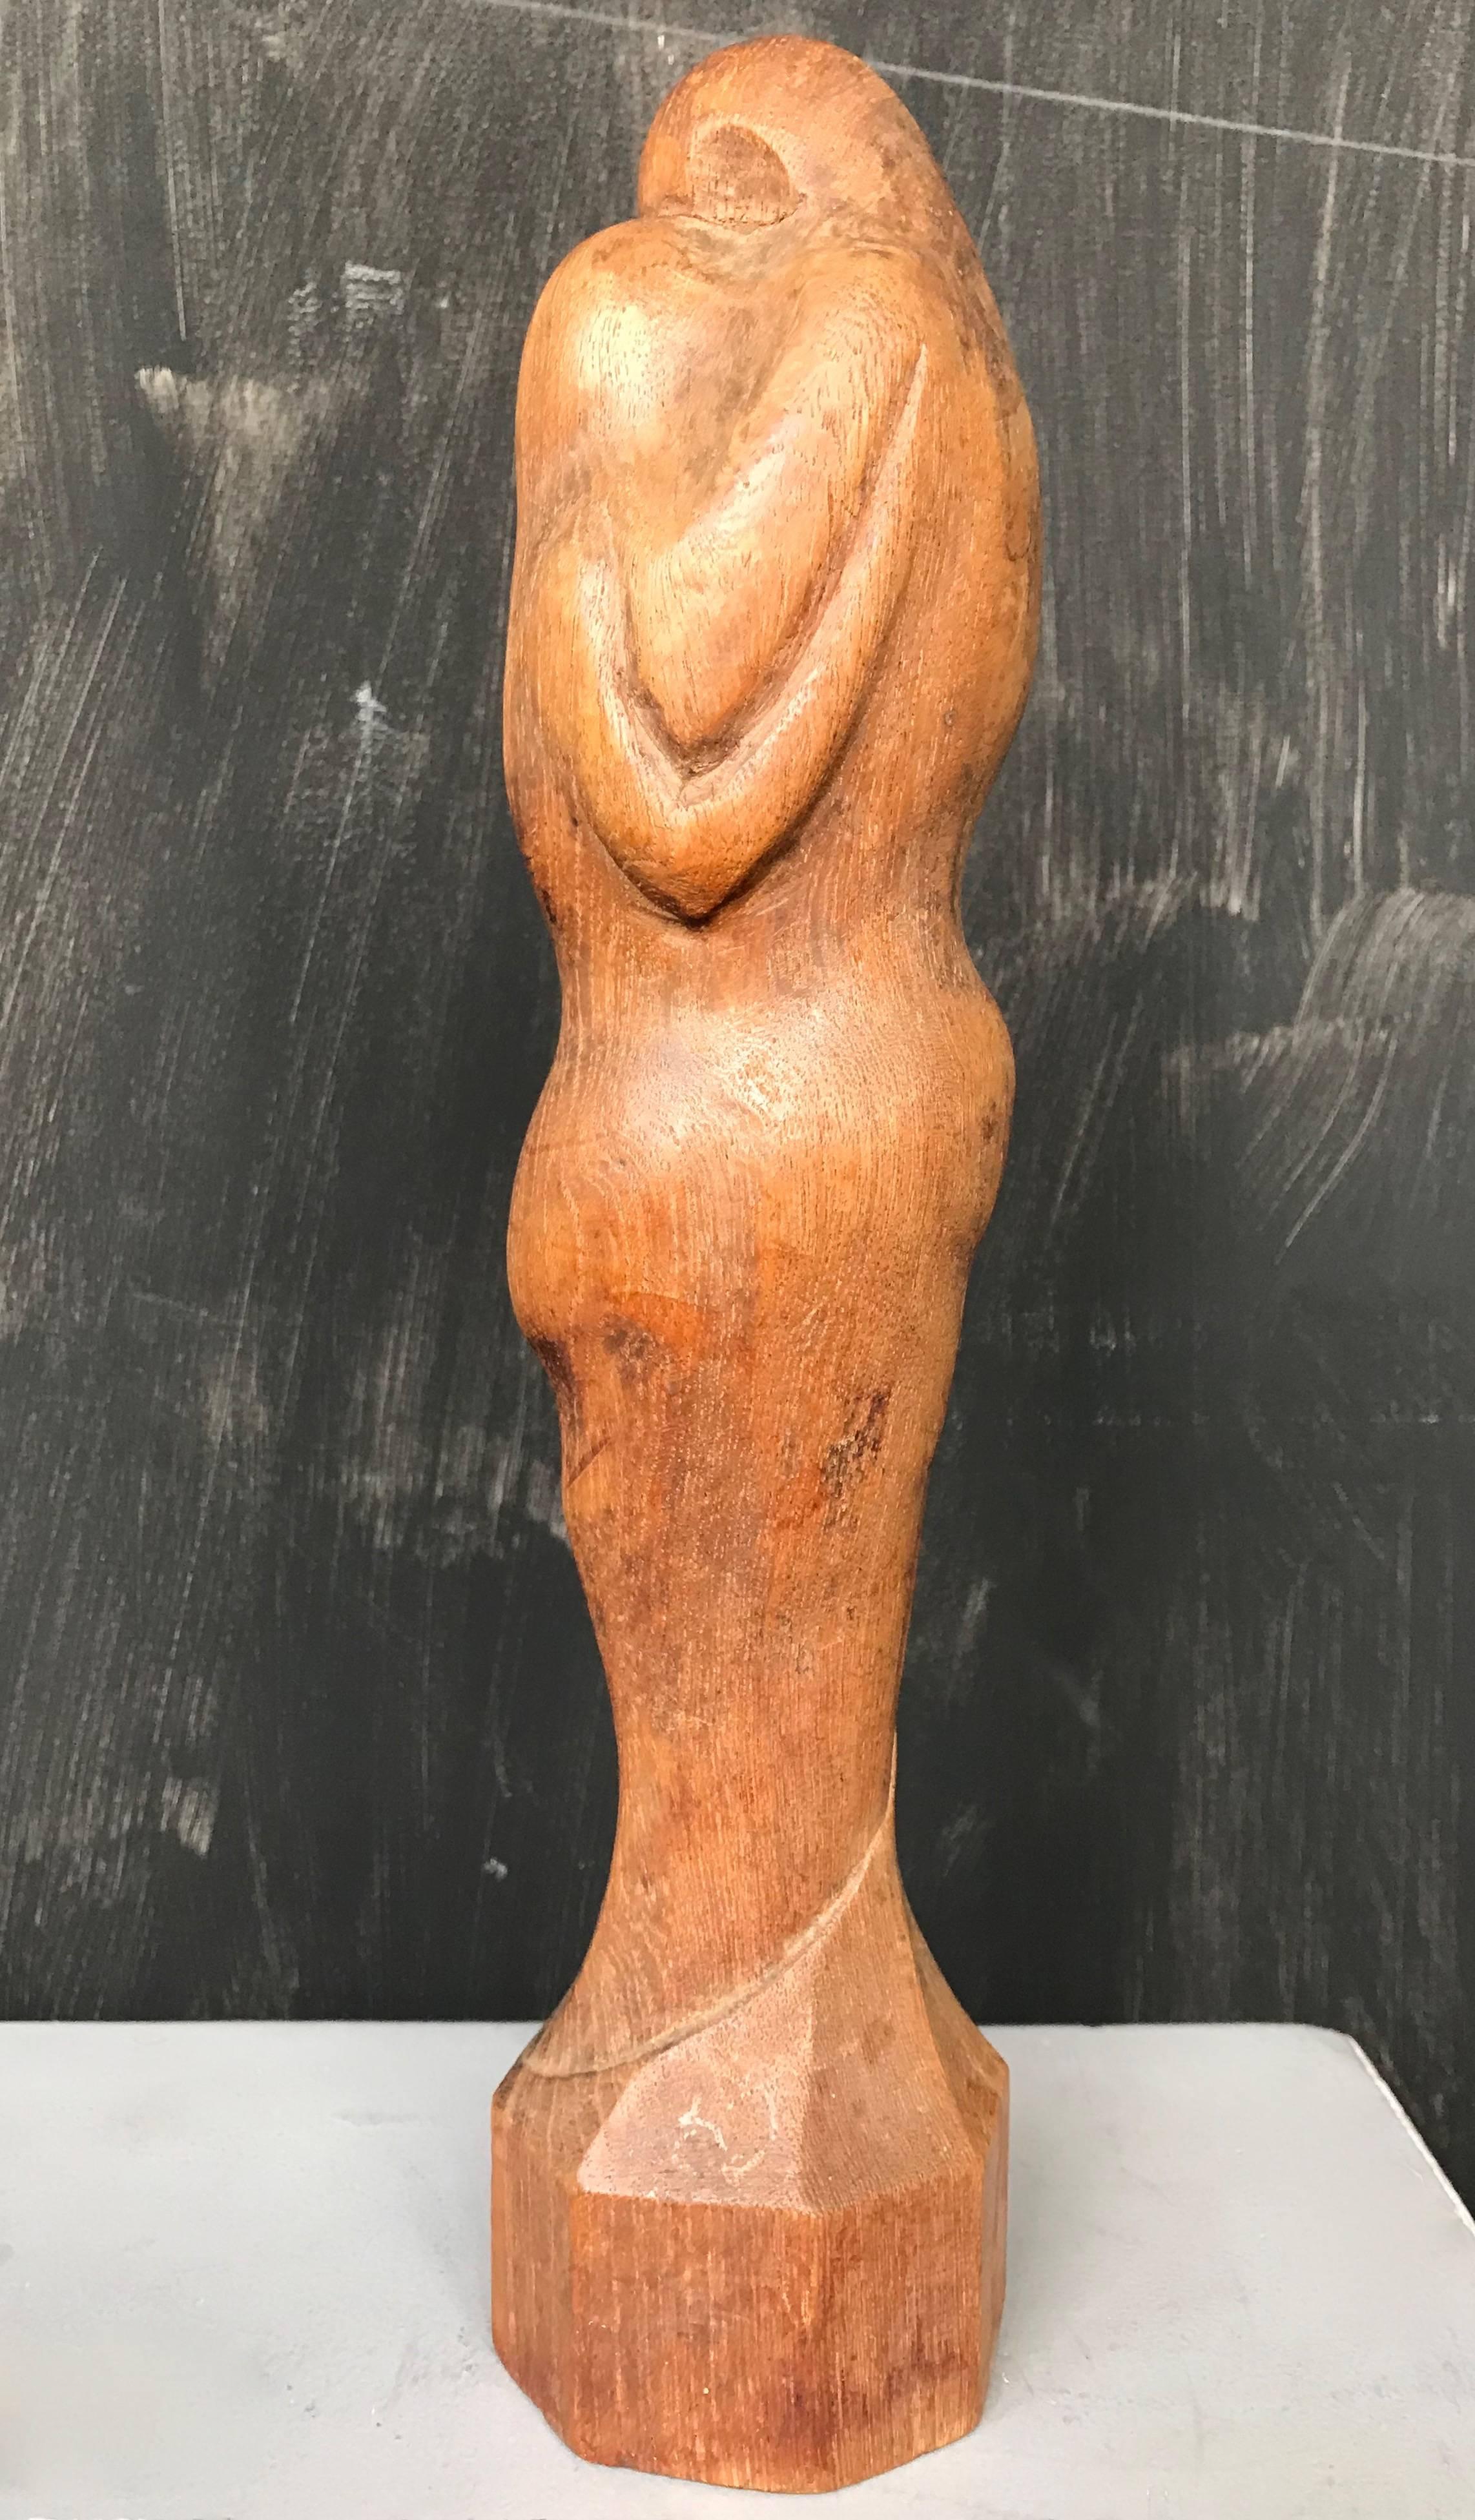 Art Nouveau Rare Early 1900s Stylish & Abstract Hand Carved Teakwood Sculpture, Kissing Pair For Sale